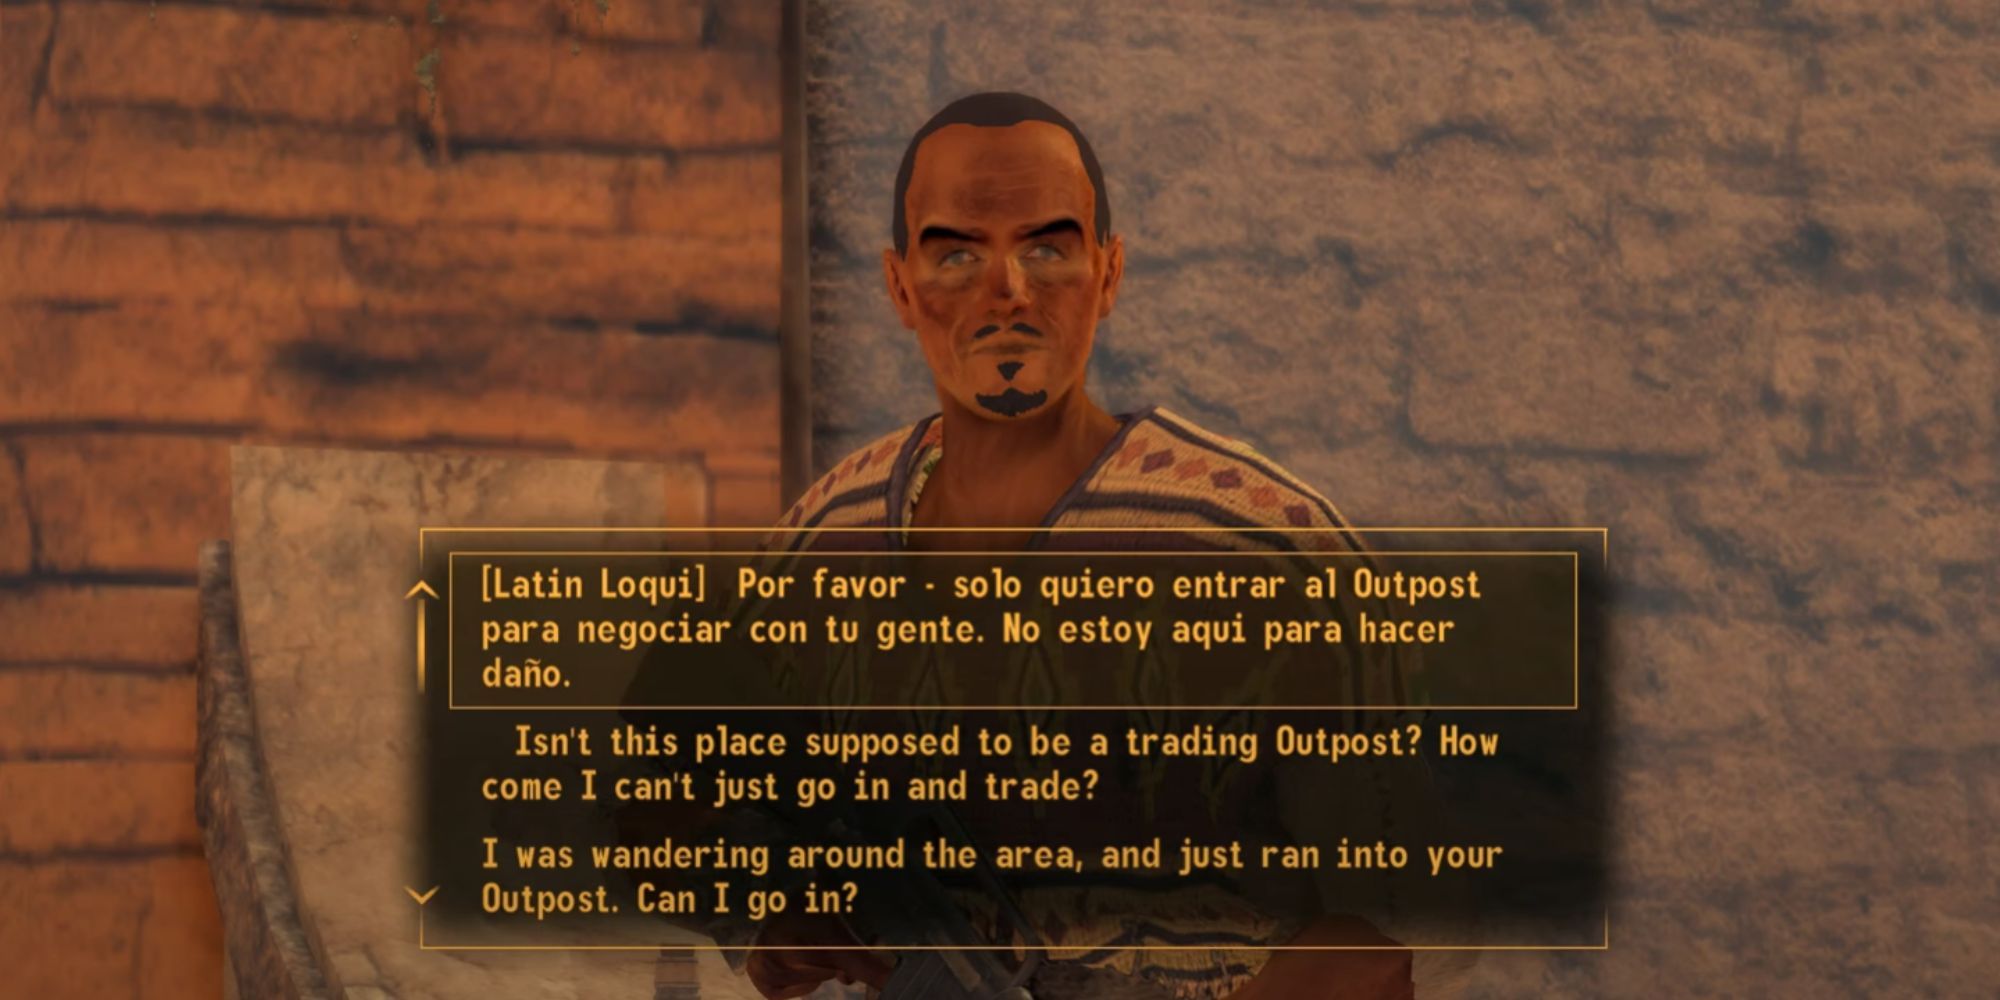 A Potential Fallout: New Vegas 2 Could Explore Post-War Mexico